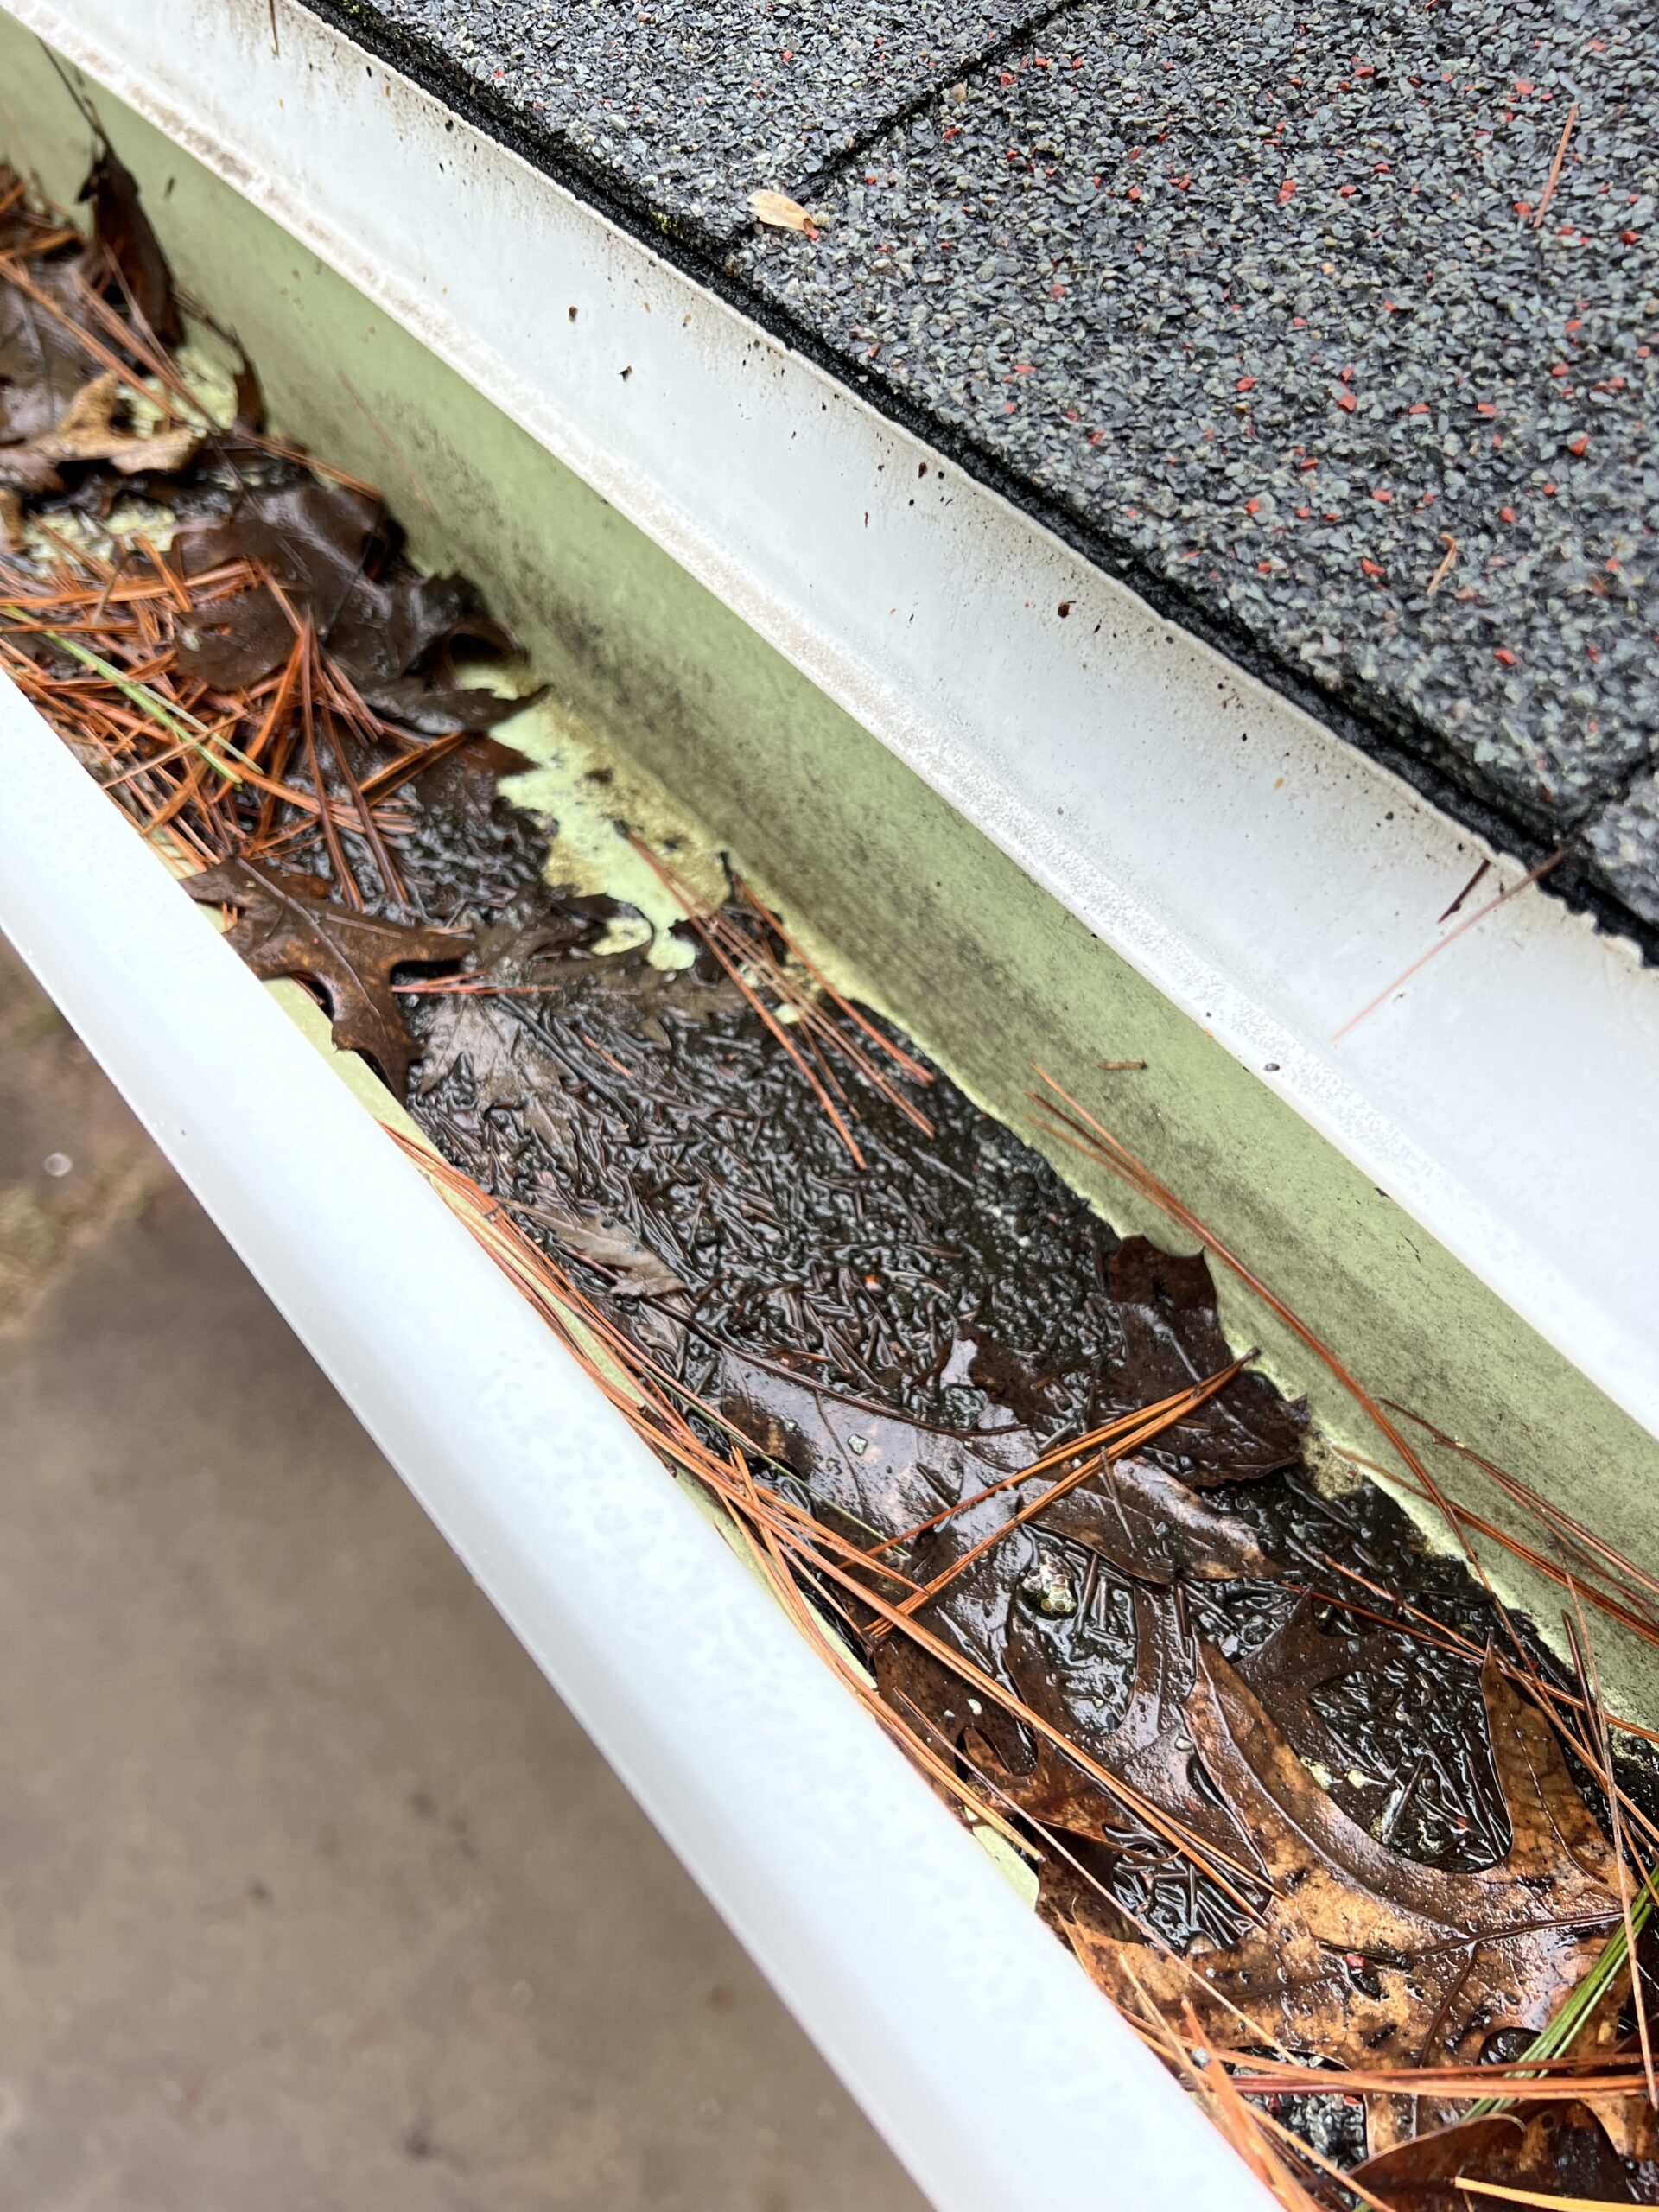 Gutters - Close Up - Filled with leaves